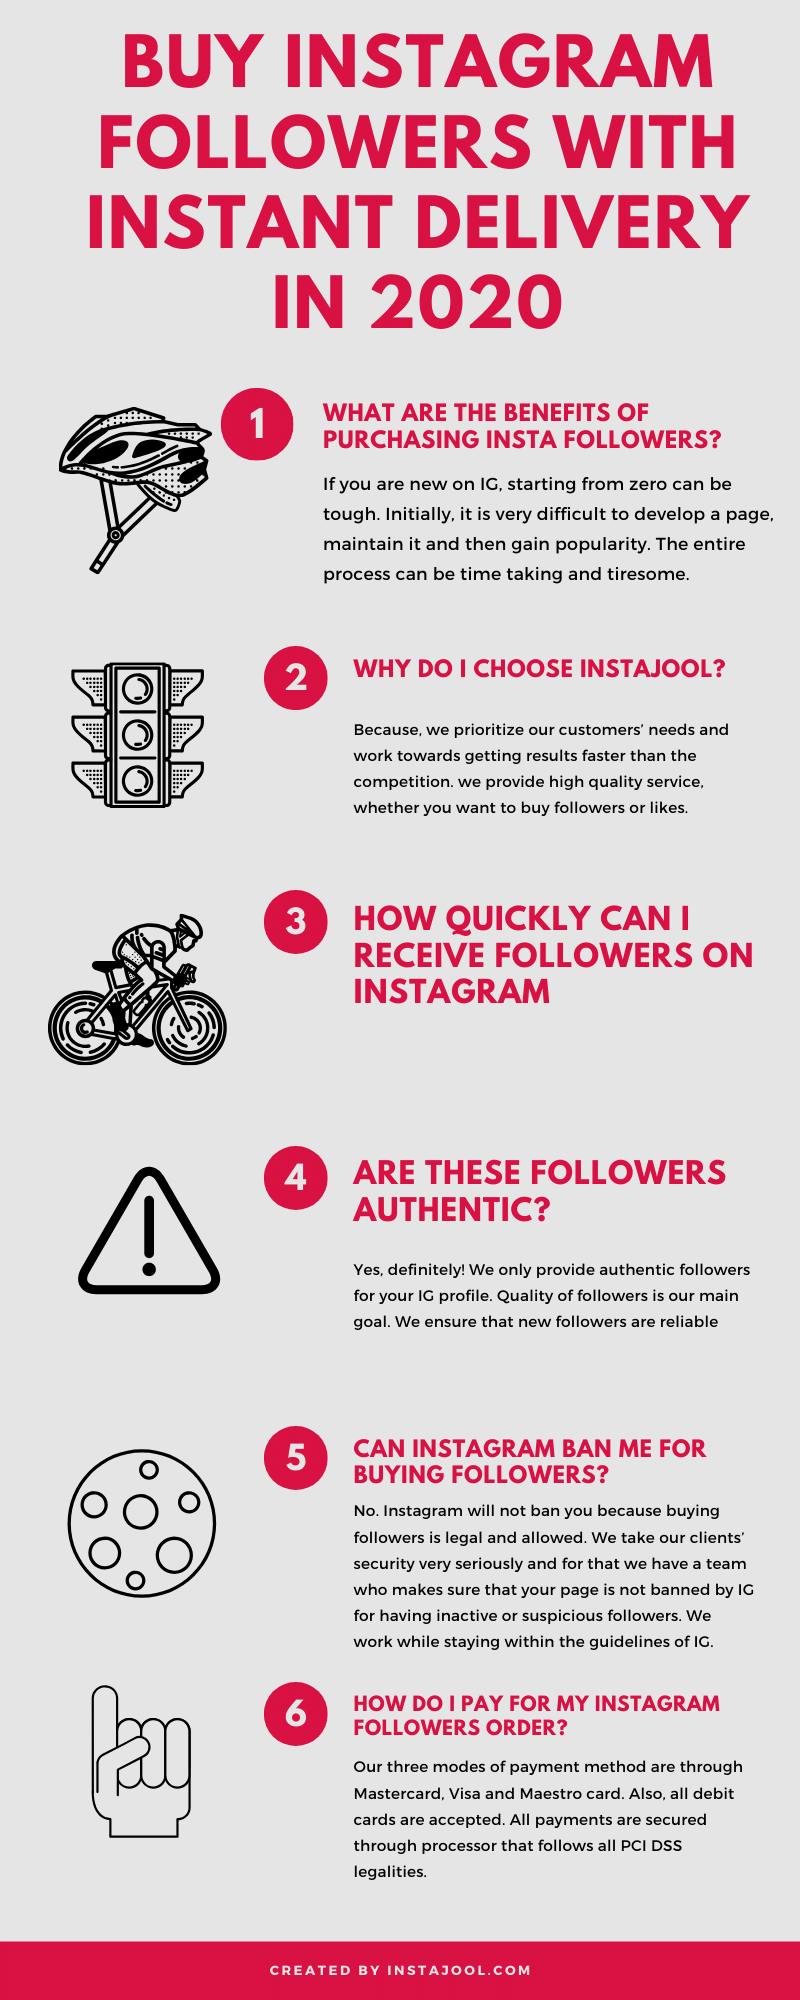 Buy Instagram Followers with Instant Delivery in 2020 Infographic by Instajool.com